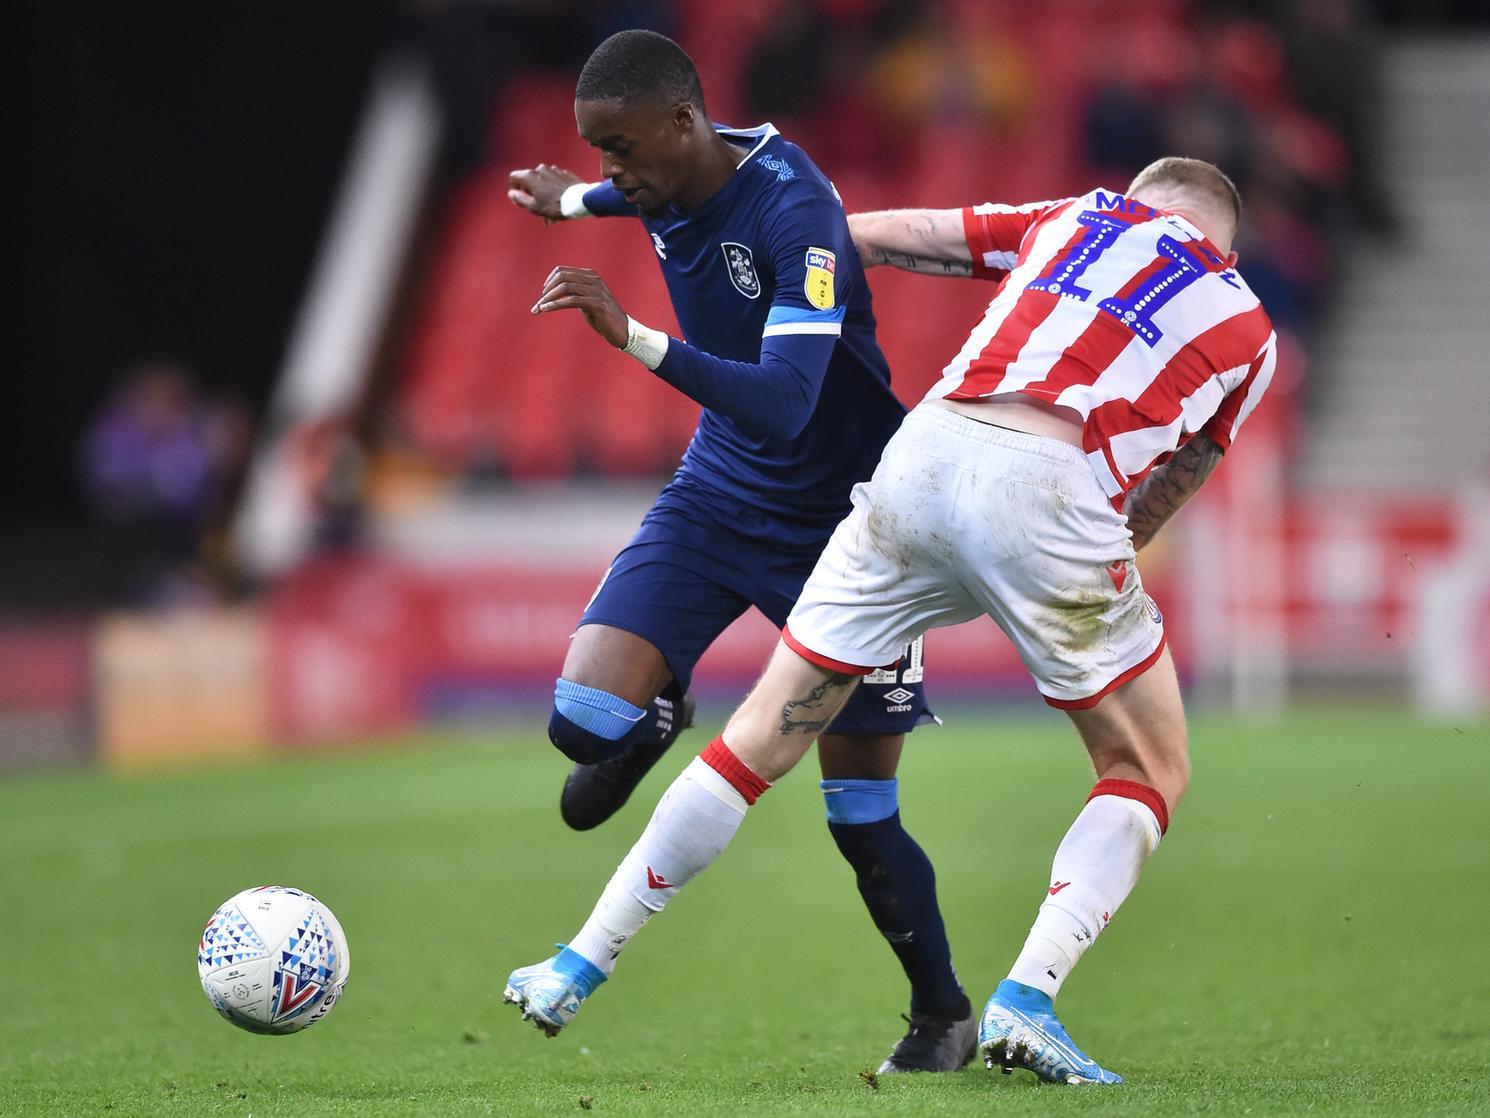 Ligue 1 side Amiens are said to be chasing Huddersfield Town wingerAdama Diakhaby, who has made just two assists in 18 outings for the Terriers this season. (Sky Sports)